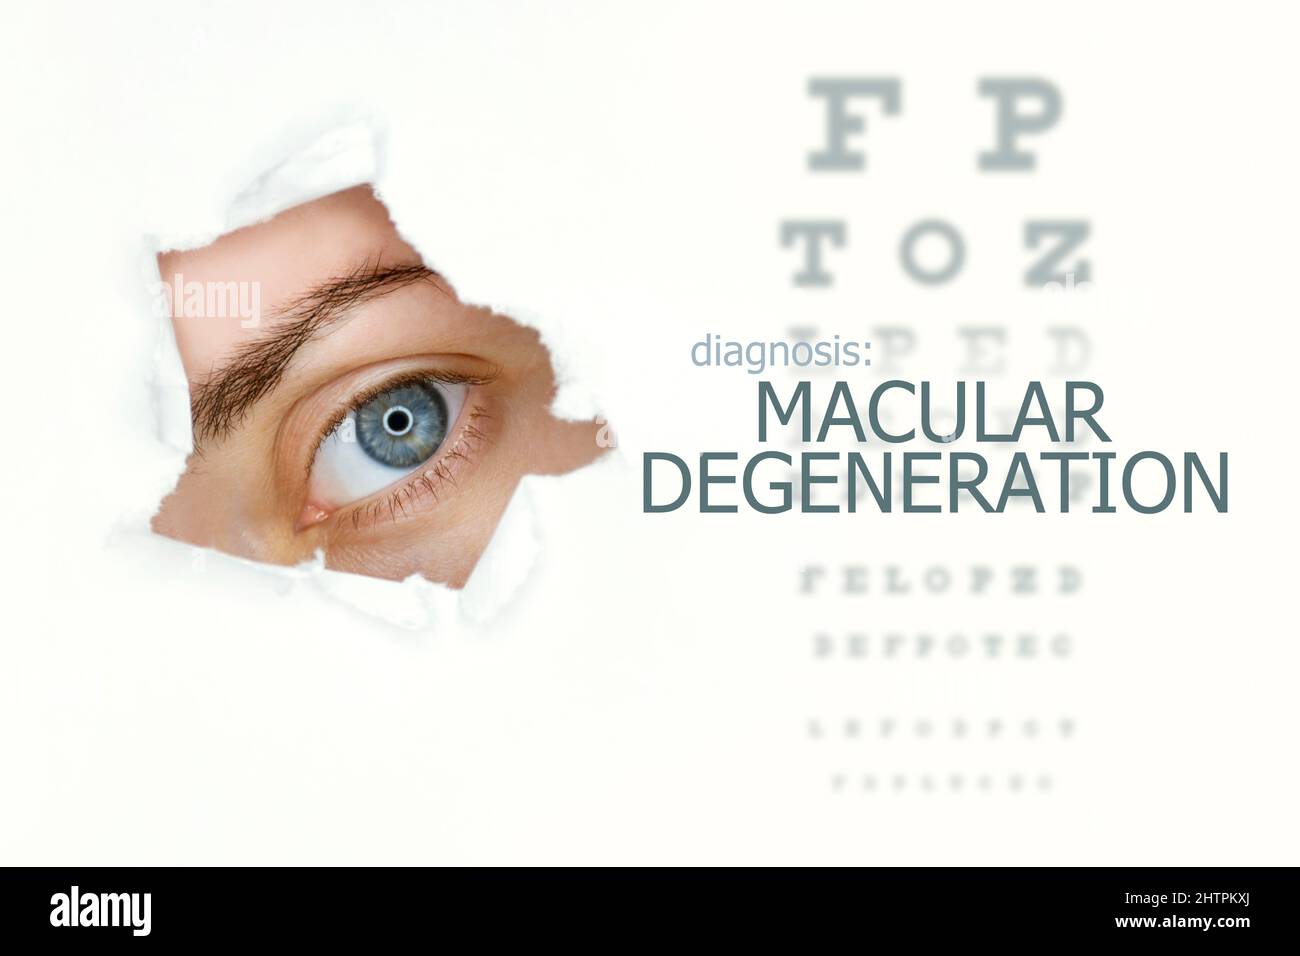 Macular degeneration disease poster with eye test chart and blue eye.Isolated on white Stock Photo